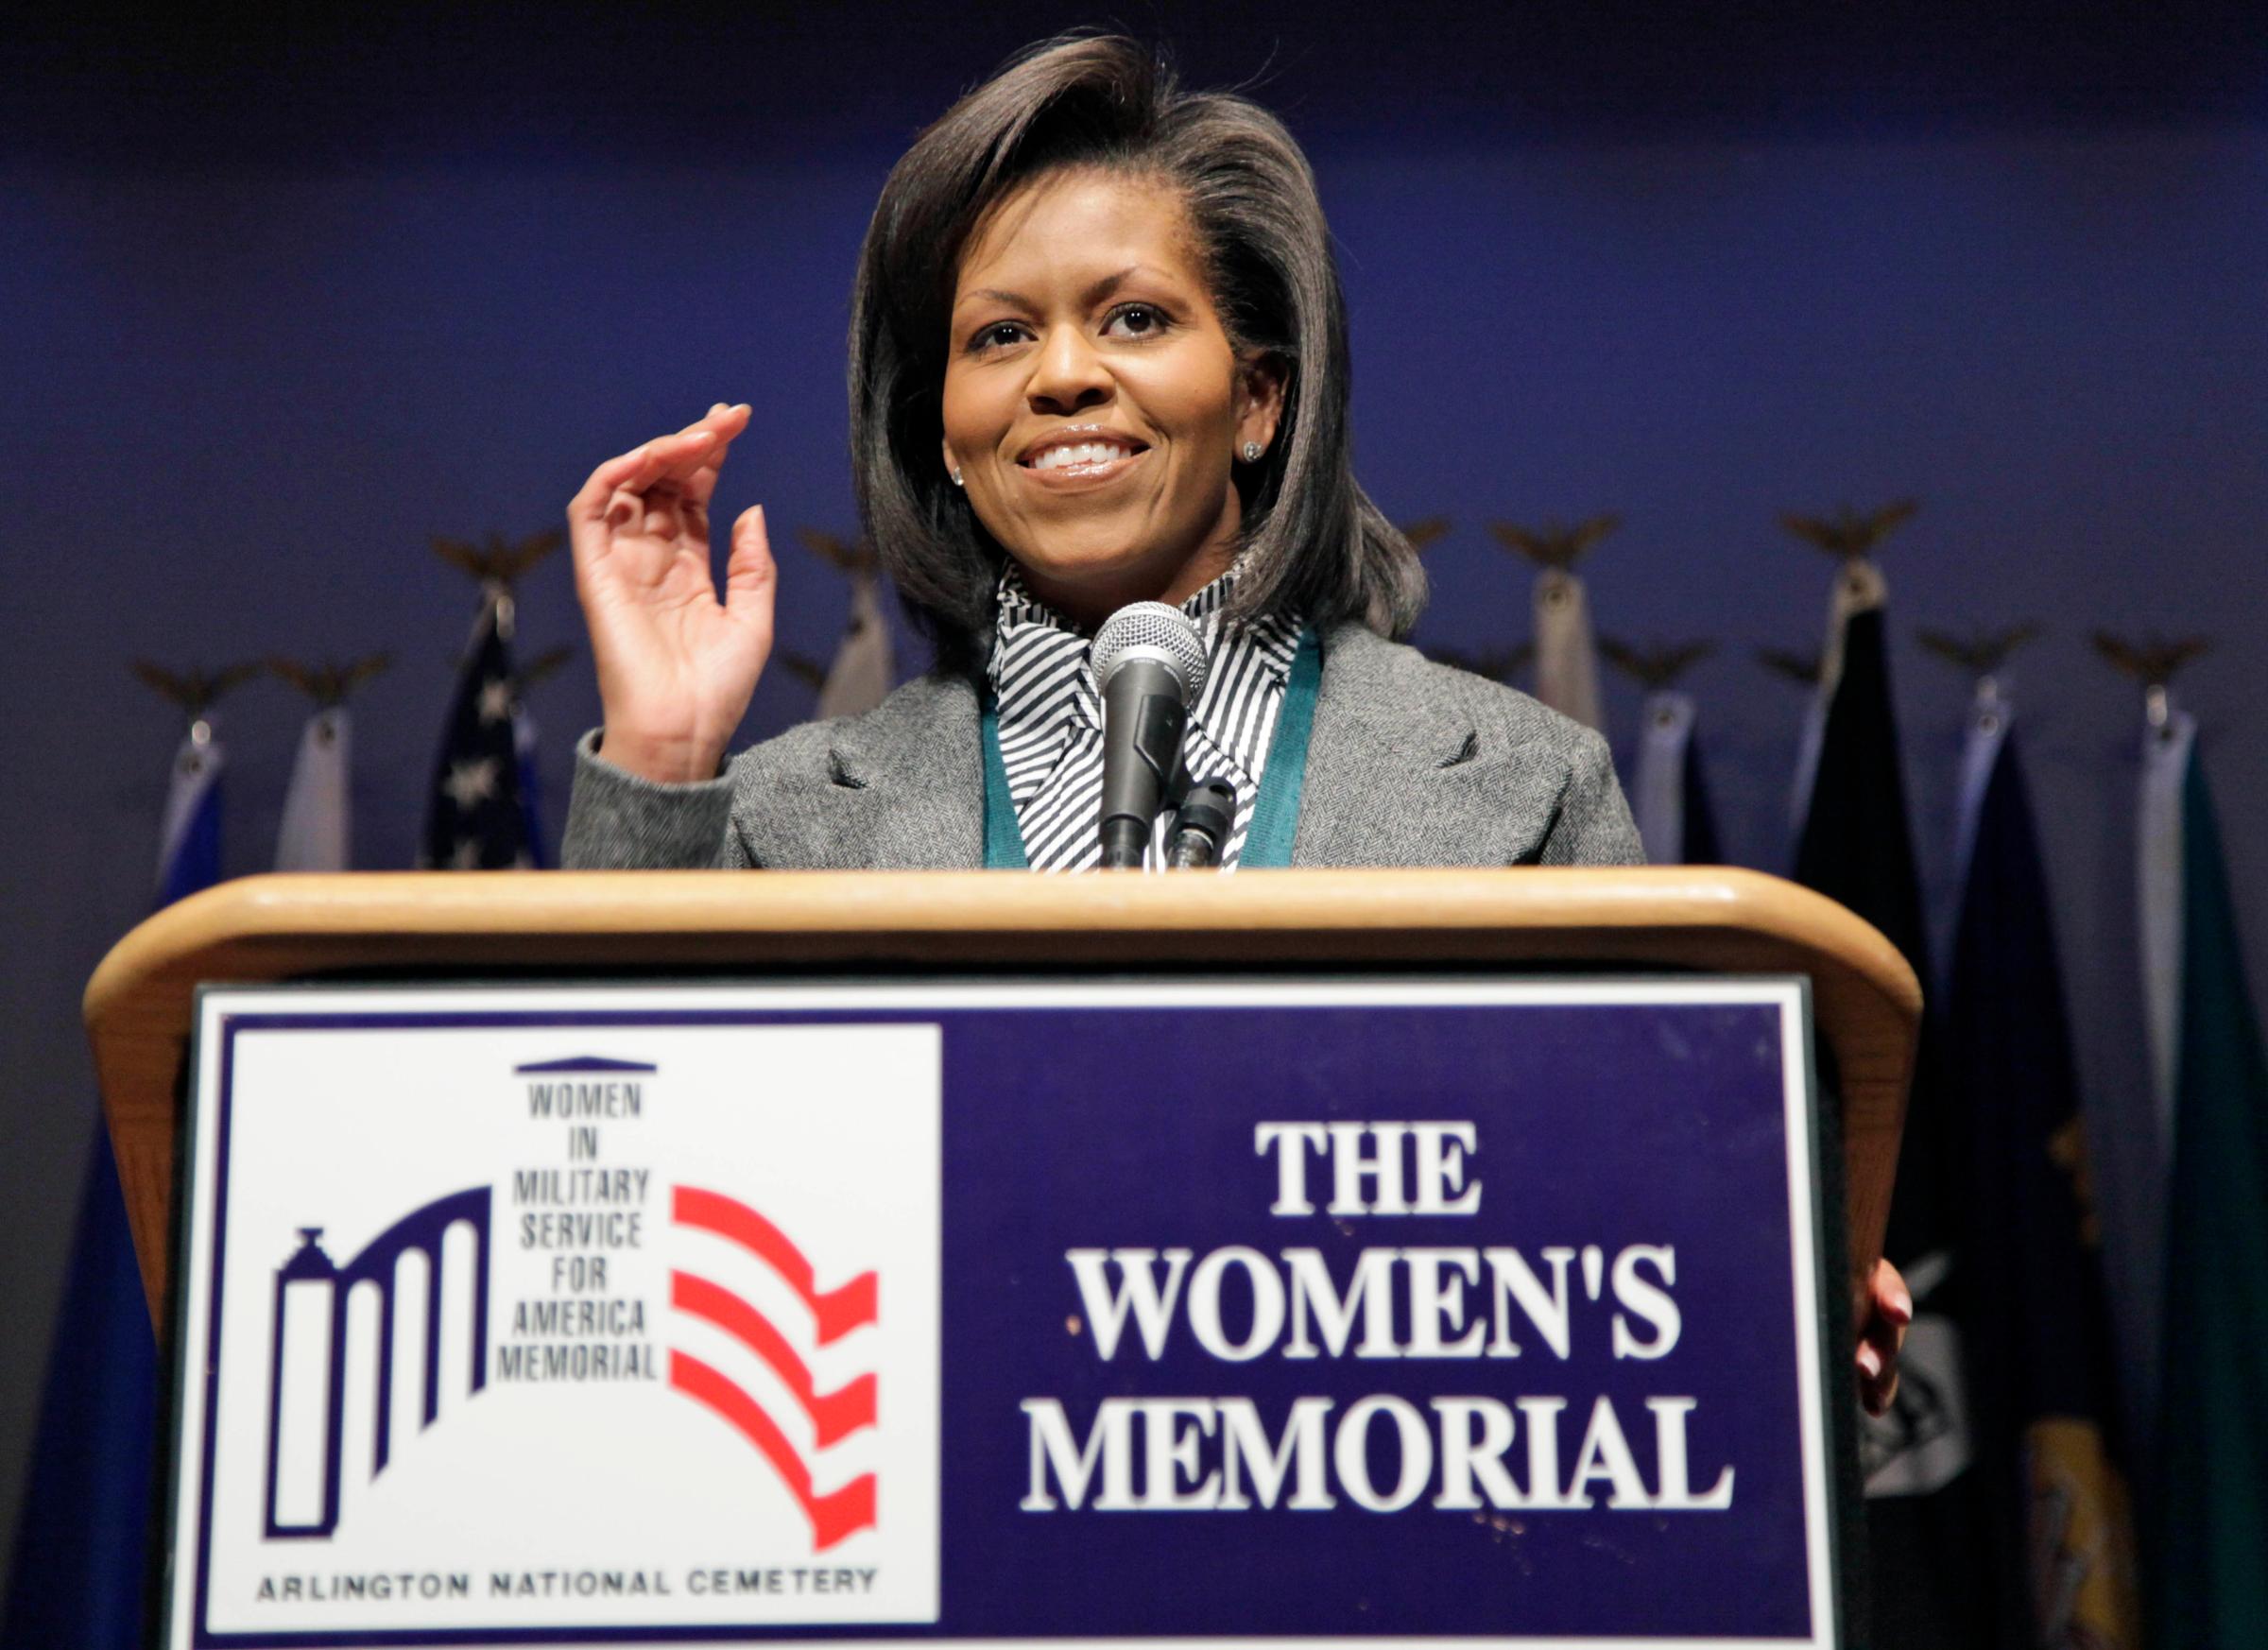 First Lady Michelle Obama speaks at Arlington National Cemetery's Women in Military Service for America Memorial Center, Tuesday, March 3, 2009, in Arlington, Virginia.